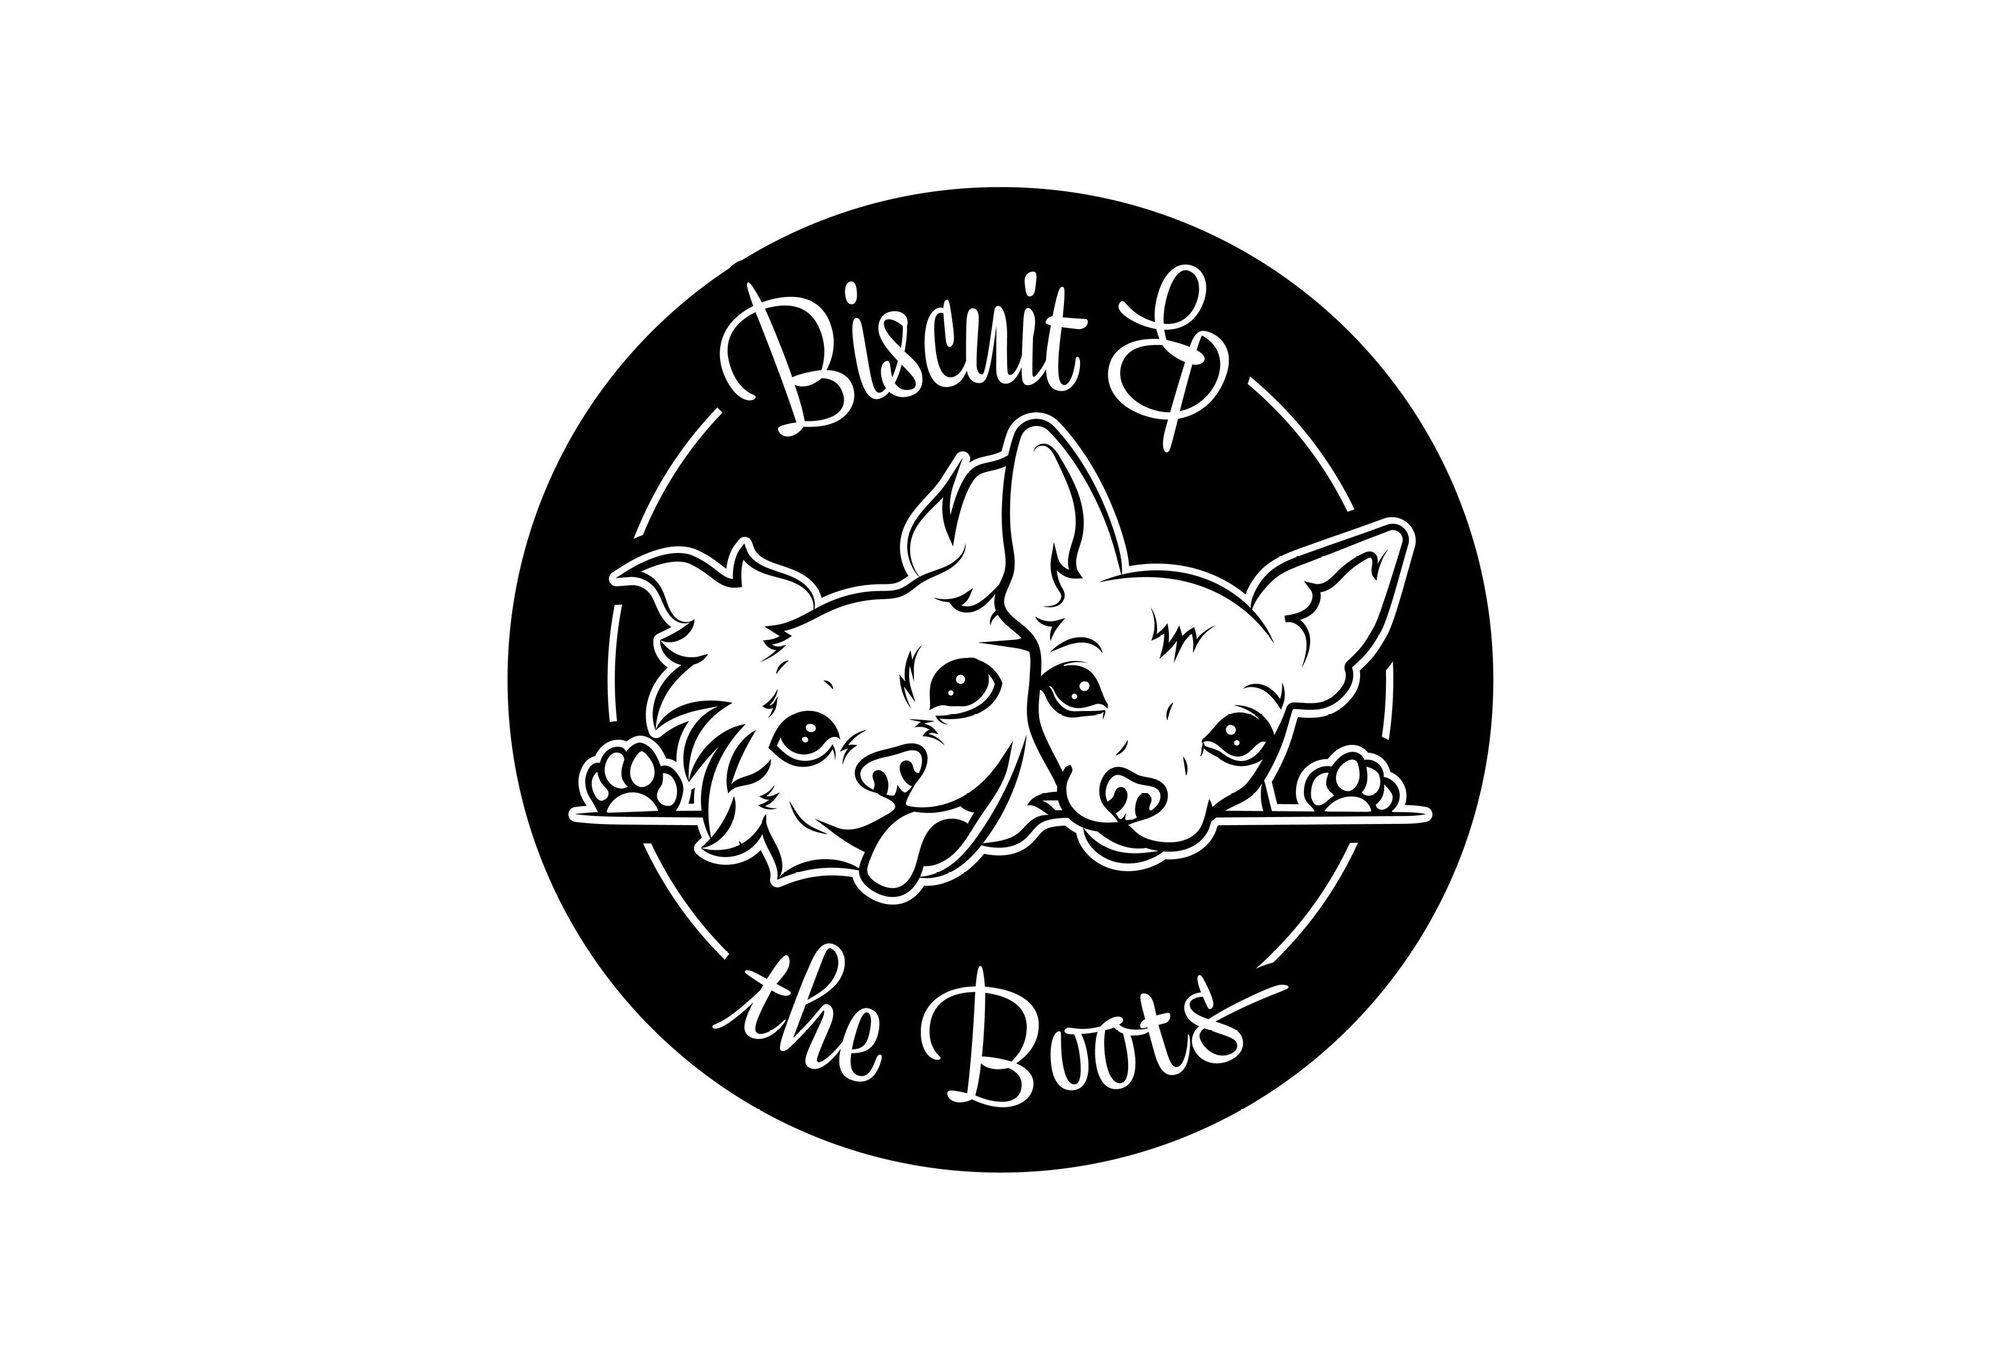 Big Style for Little Dogs - Biscuit & the Boots